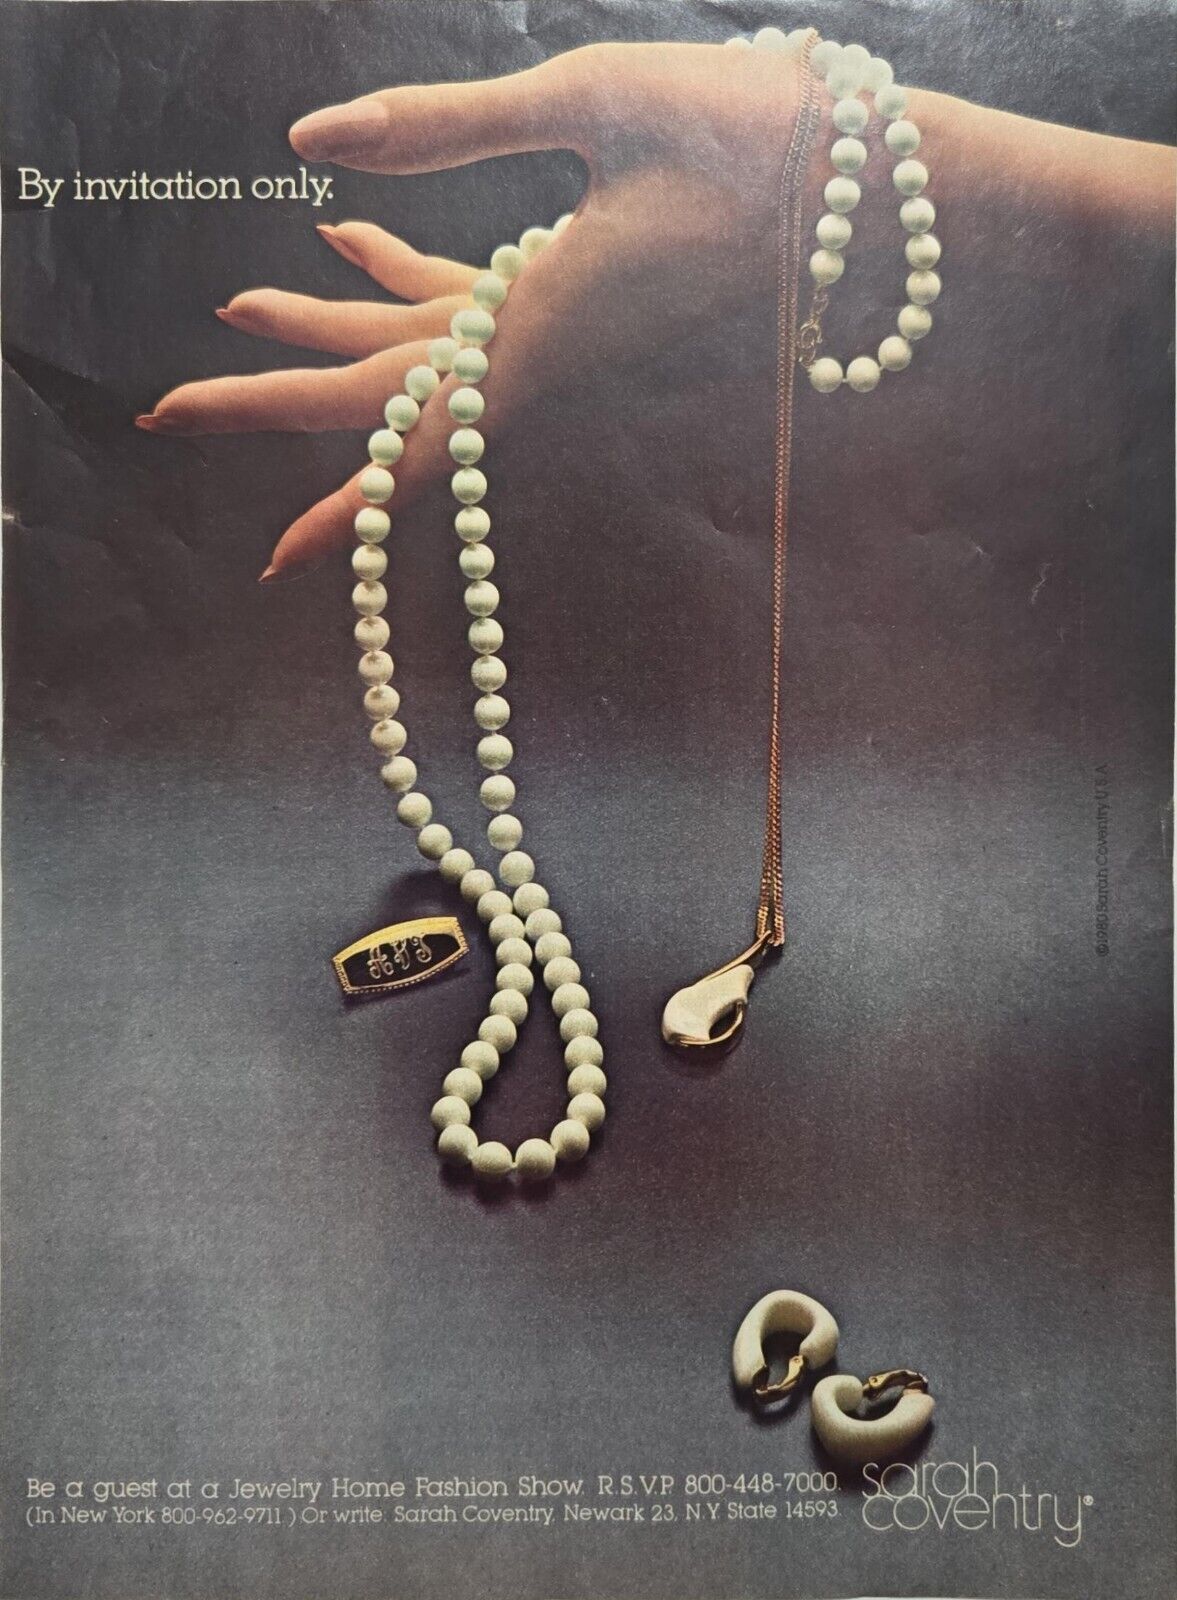 1980 Vintage print ad - Sarah Coventry fashion Jewelry Hand Model Pearl Necklace